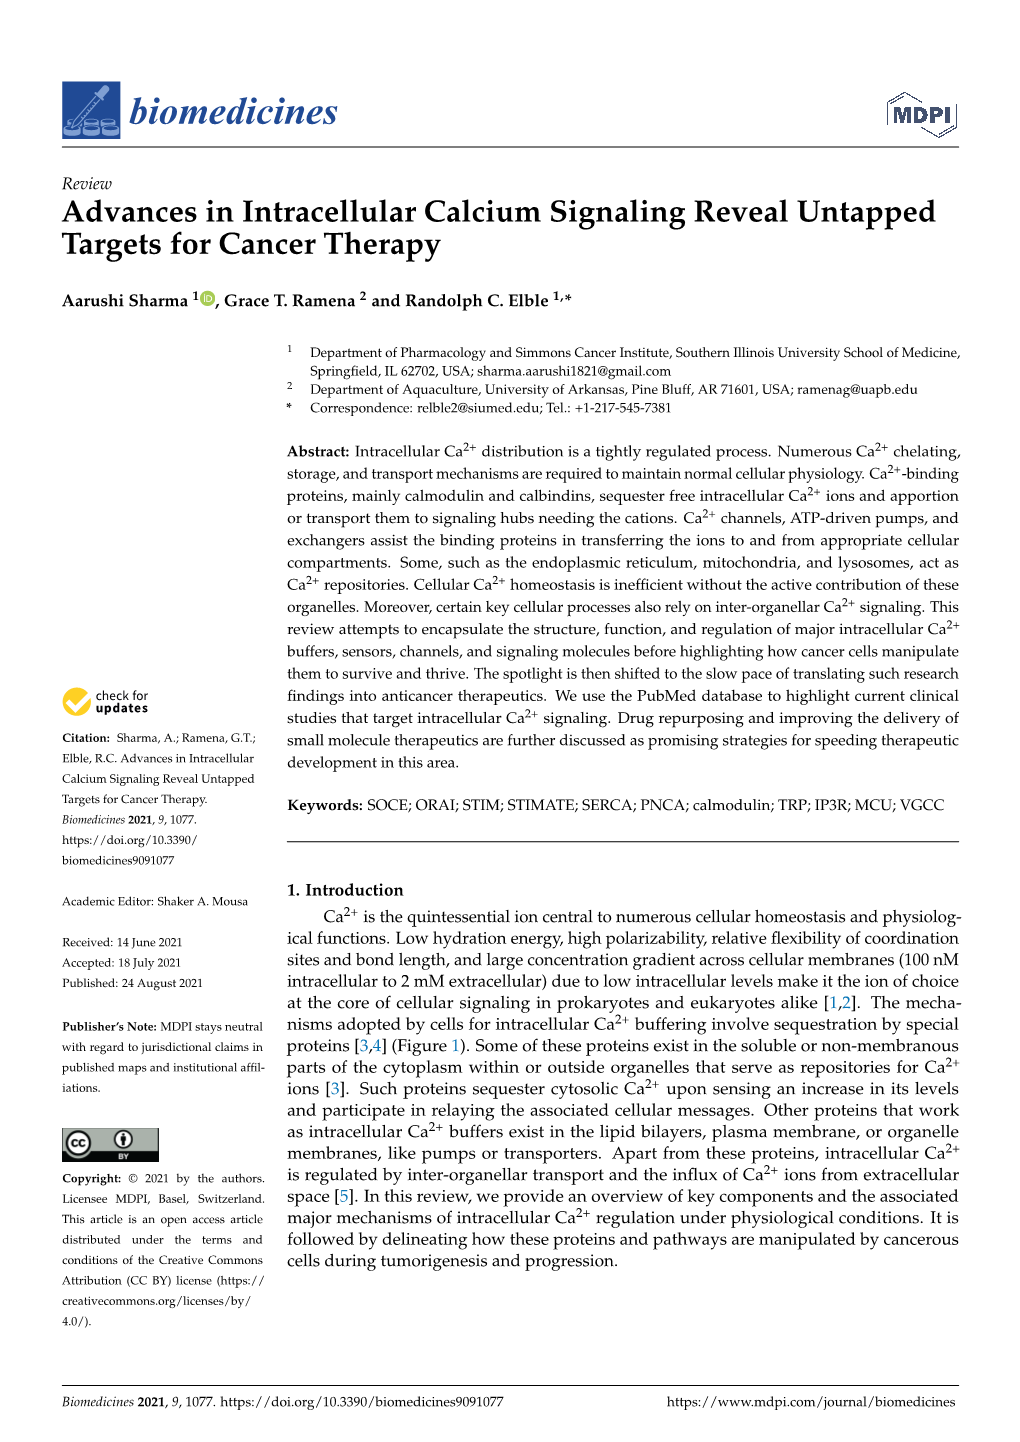 Advances in Intracellular Calcium Signaling Reveal Untapped Targets for Cancer Therapy